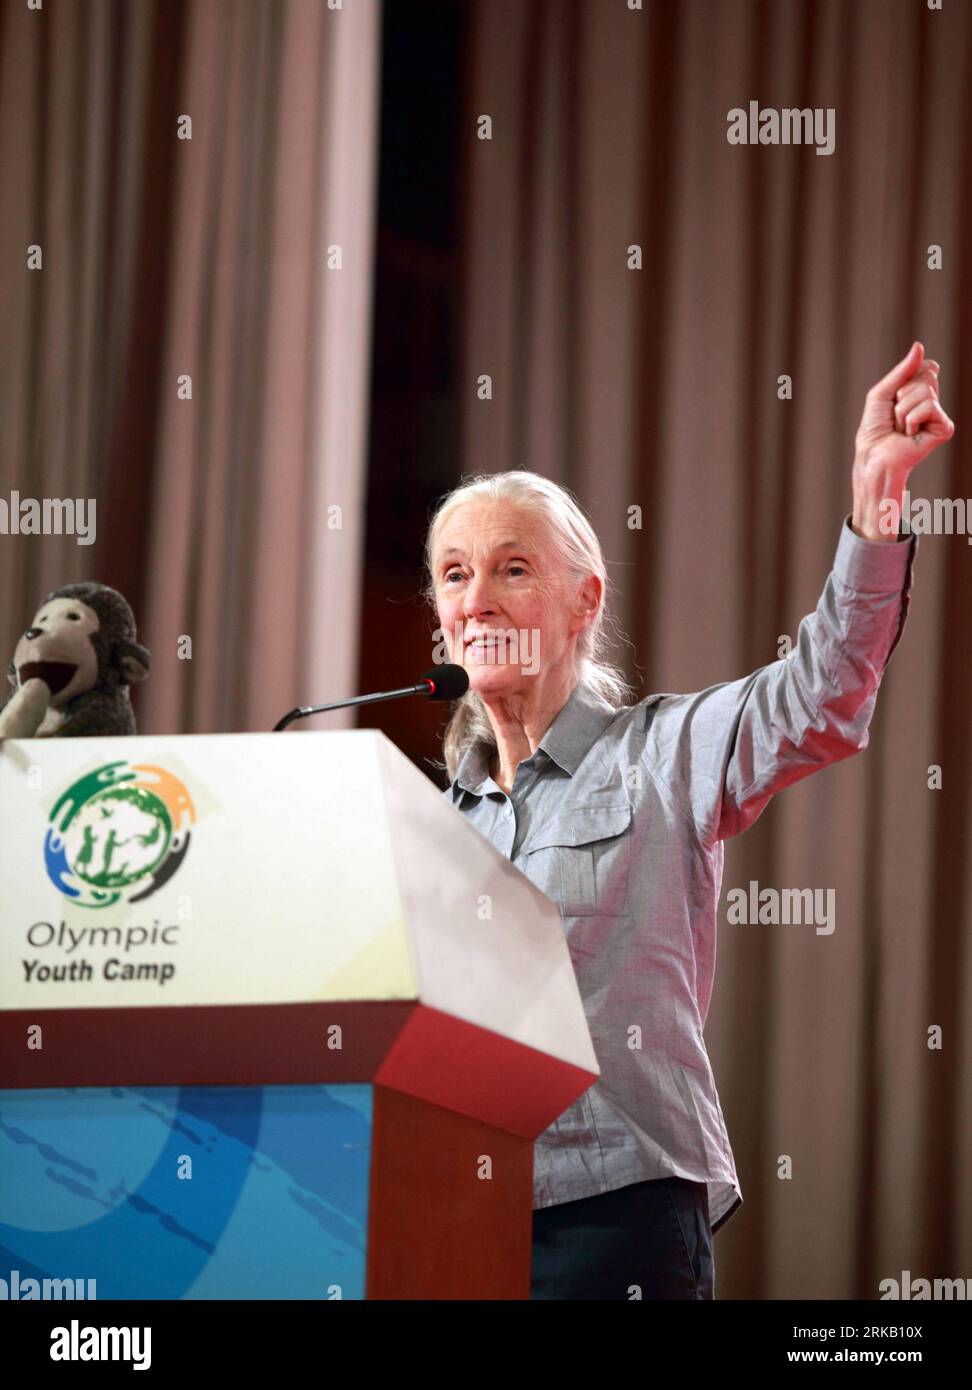 (100918) -- BEIJING, Sept. 18, 2010 (Xinhua) -- Dr. Jane Goodall addresses a summit at Beijing 101 Middle School in Beijing, capital of China, on Sept. 18, 2010. The summit, featuring biological diversity this year, was held by Roots and Shoots. Roots and Shoots is a youth environmental educational program initiated by Dr. Jane Goodall, Mother of Chimpanzees , in Tanzania in 1991. Goodall is one of the most respected women scientist-activists of the 20th century. For over 45 years, since her 20s, the English-native has studied chimpanzees in Africa. She received the United Nations Messenger of Stock Photo